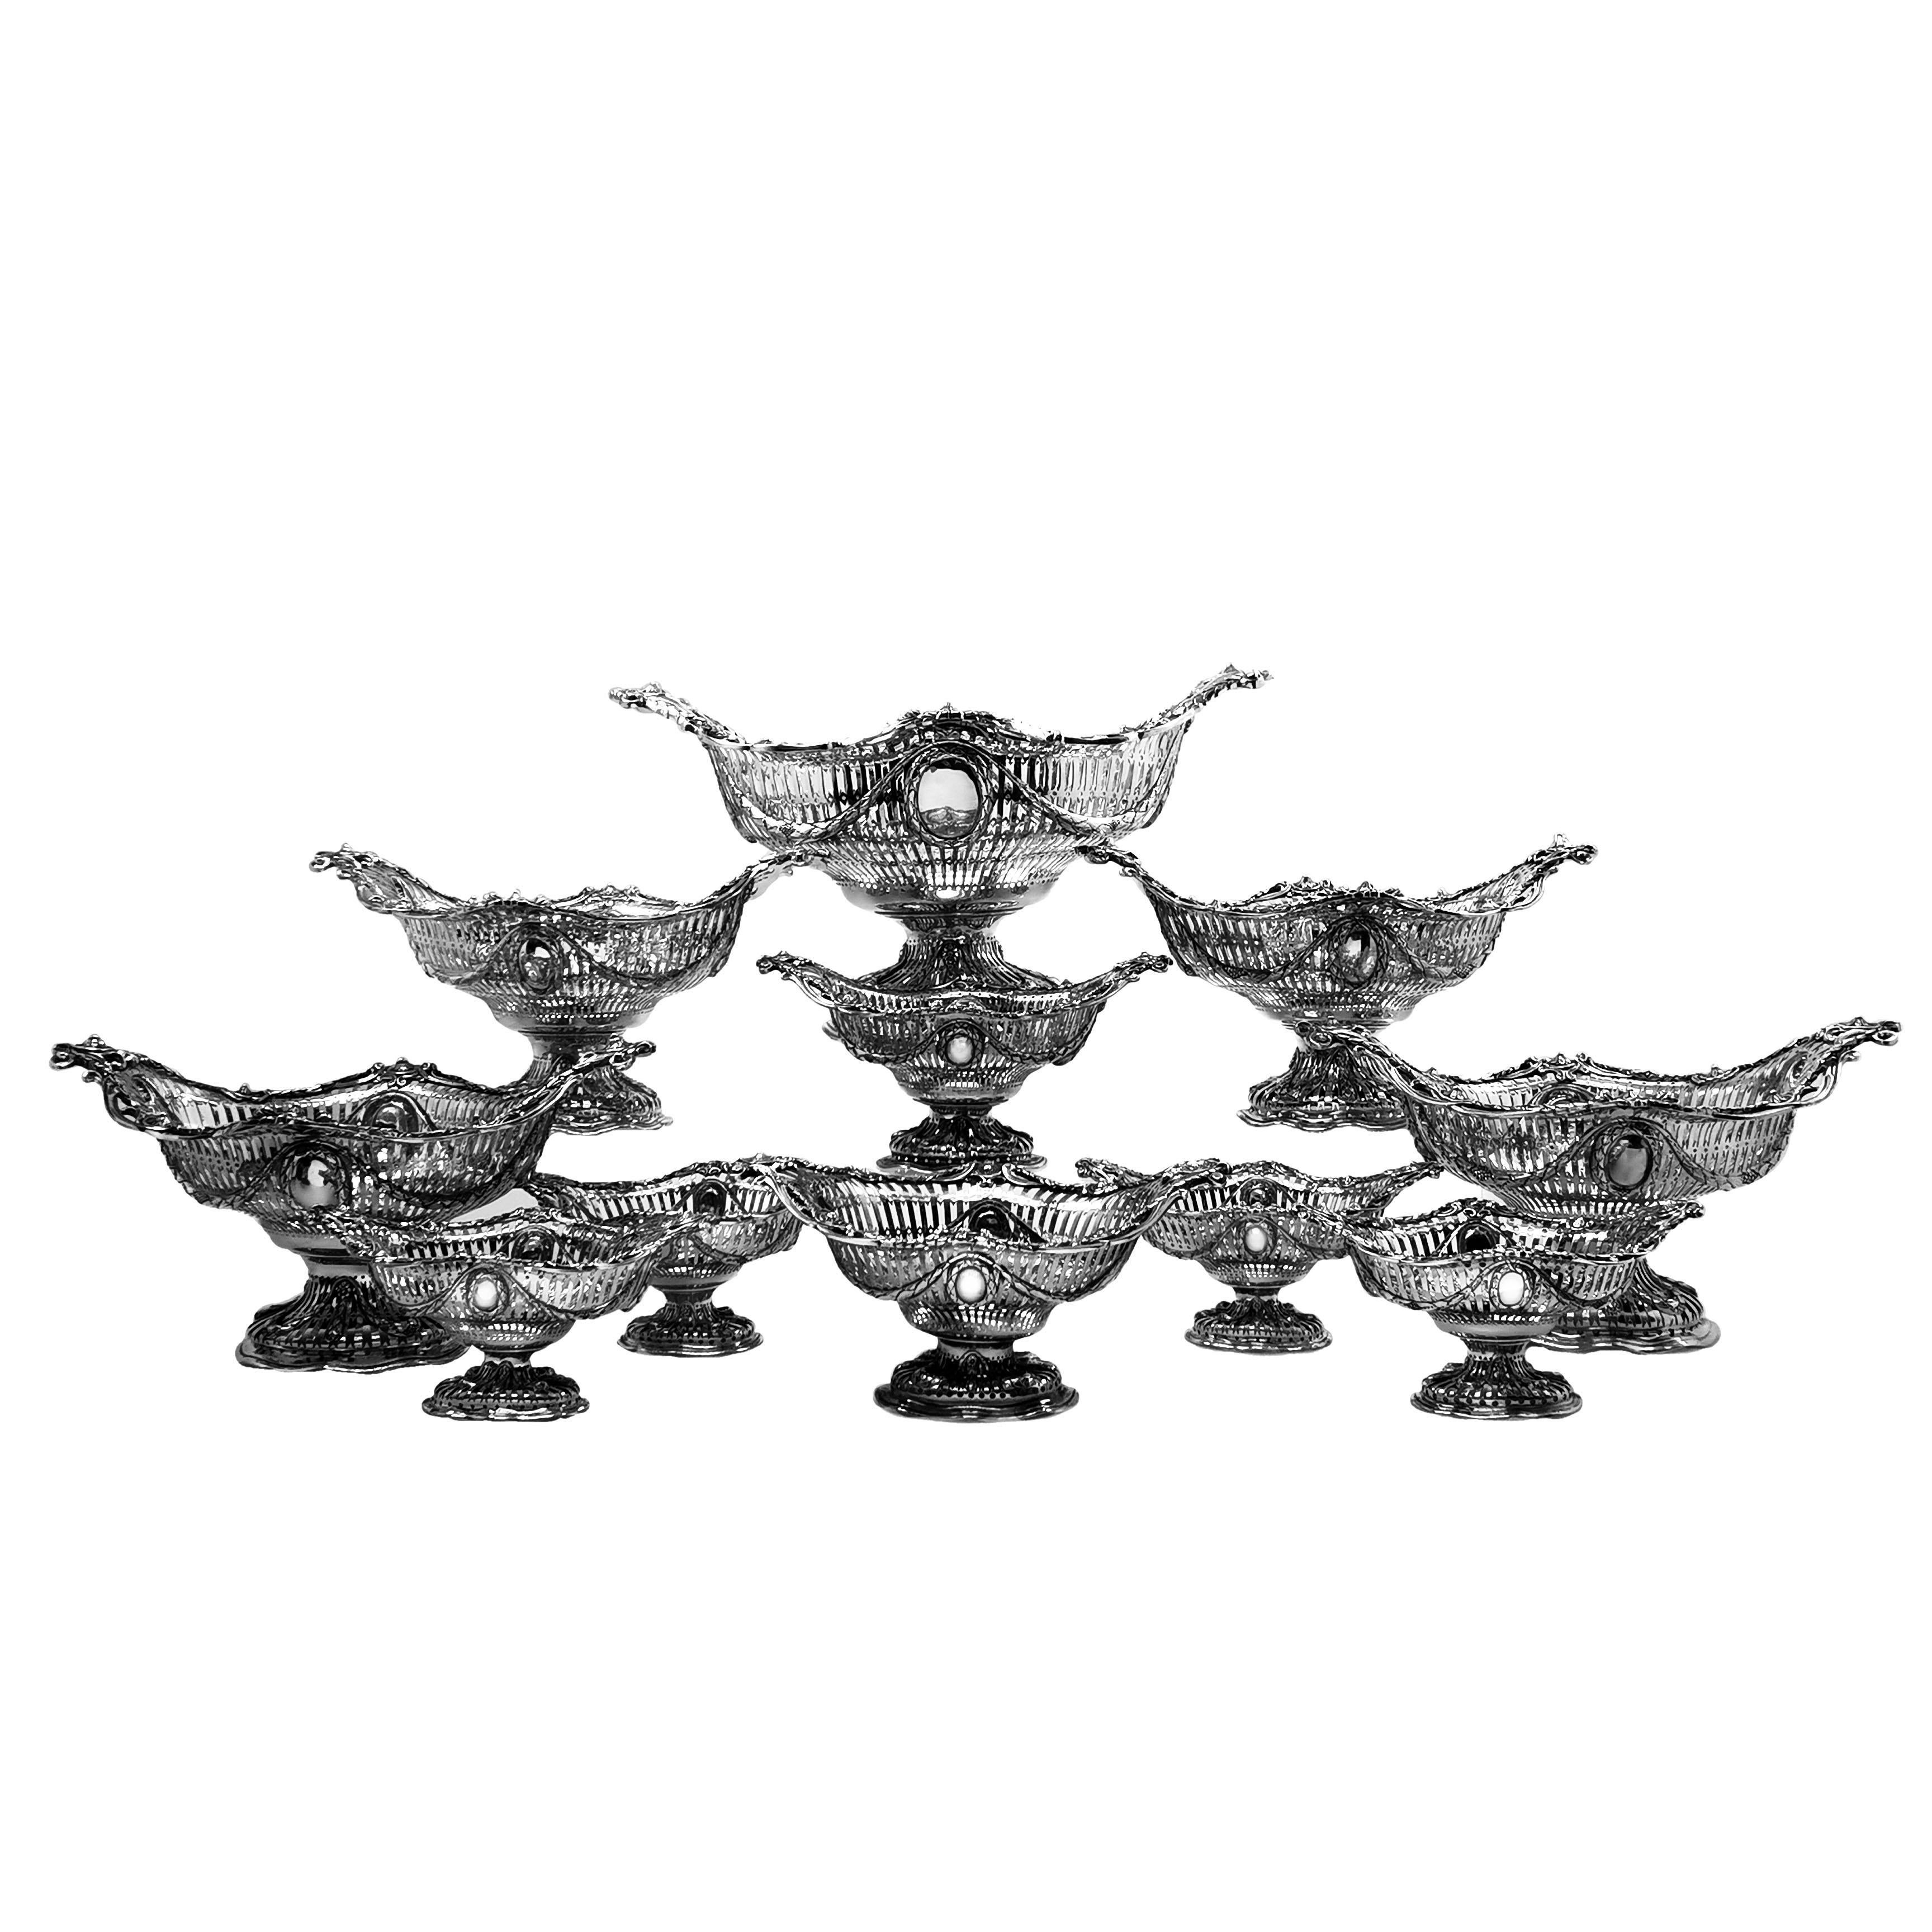 A magnificent Suite of 11 Sterling Silver Baskets made in the shape of classic 1770s Georgian Silver Adams Style Epergne Baskets. The Baskets make up an impressive centrepiece when used as suite can can be used in any number of configurations to